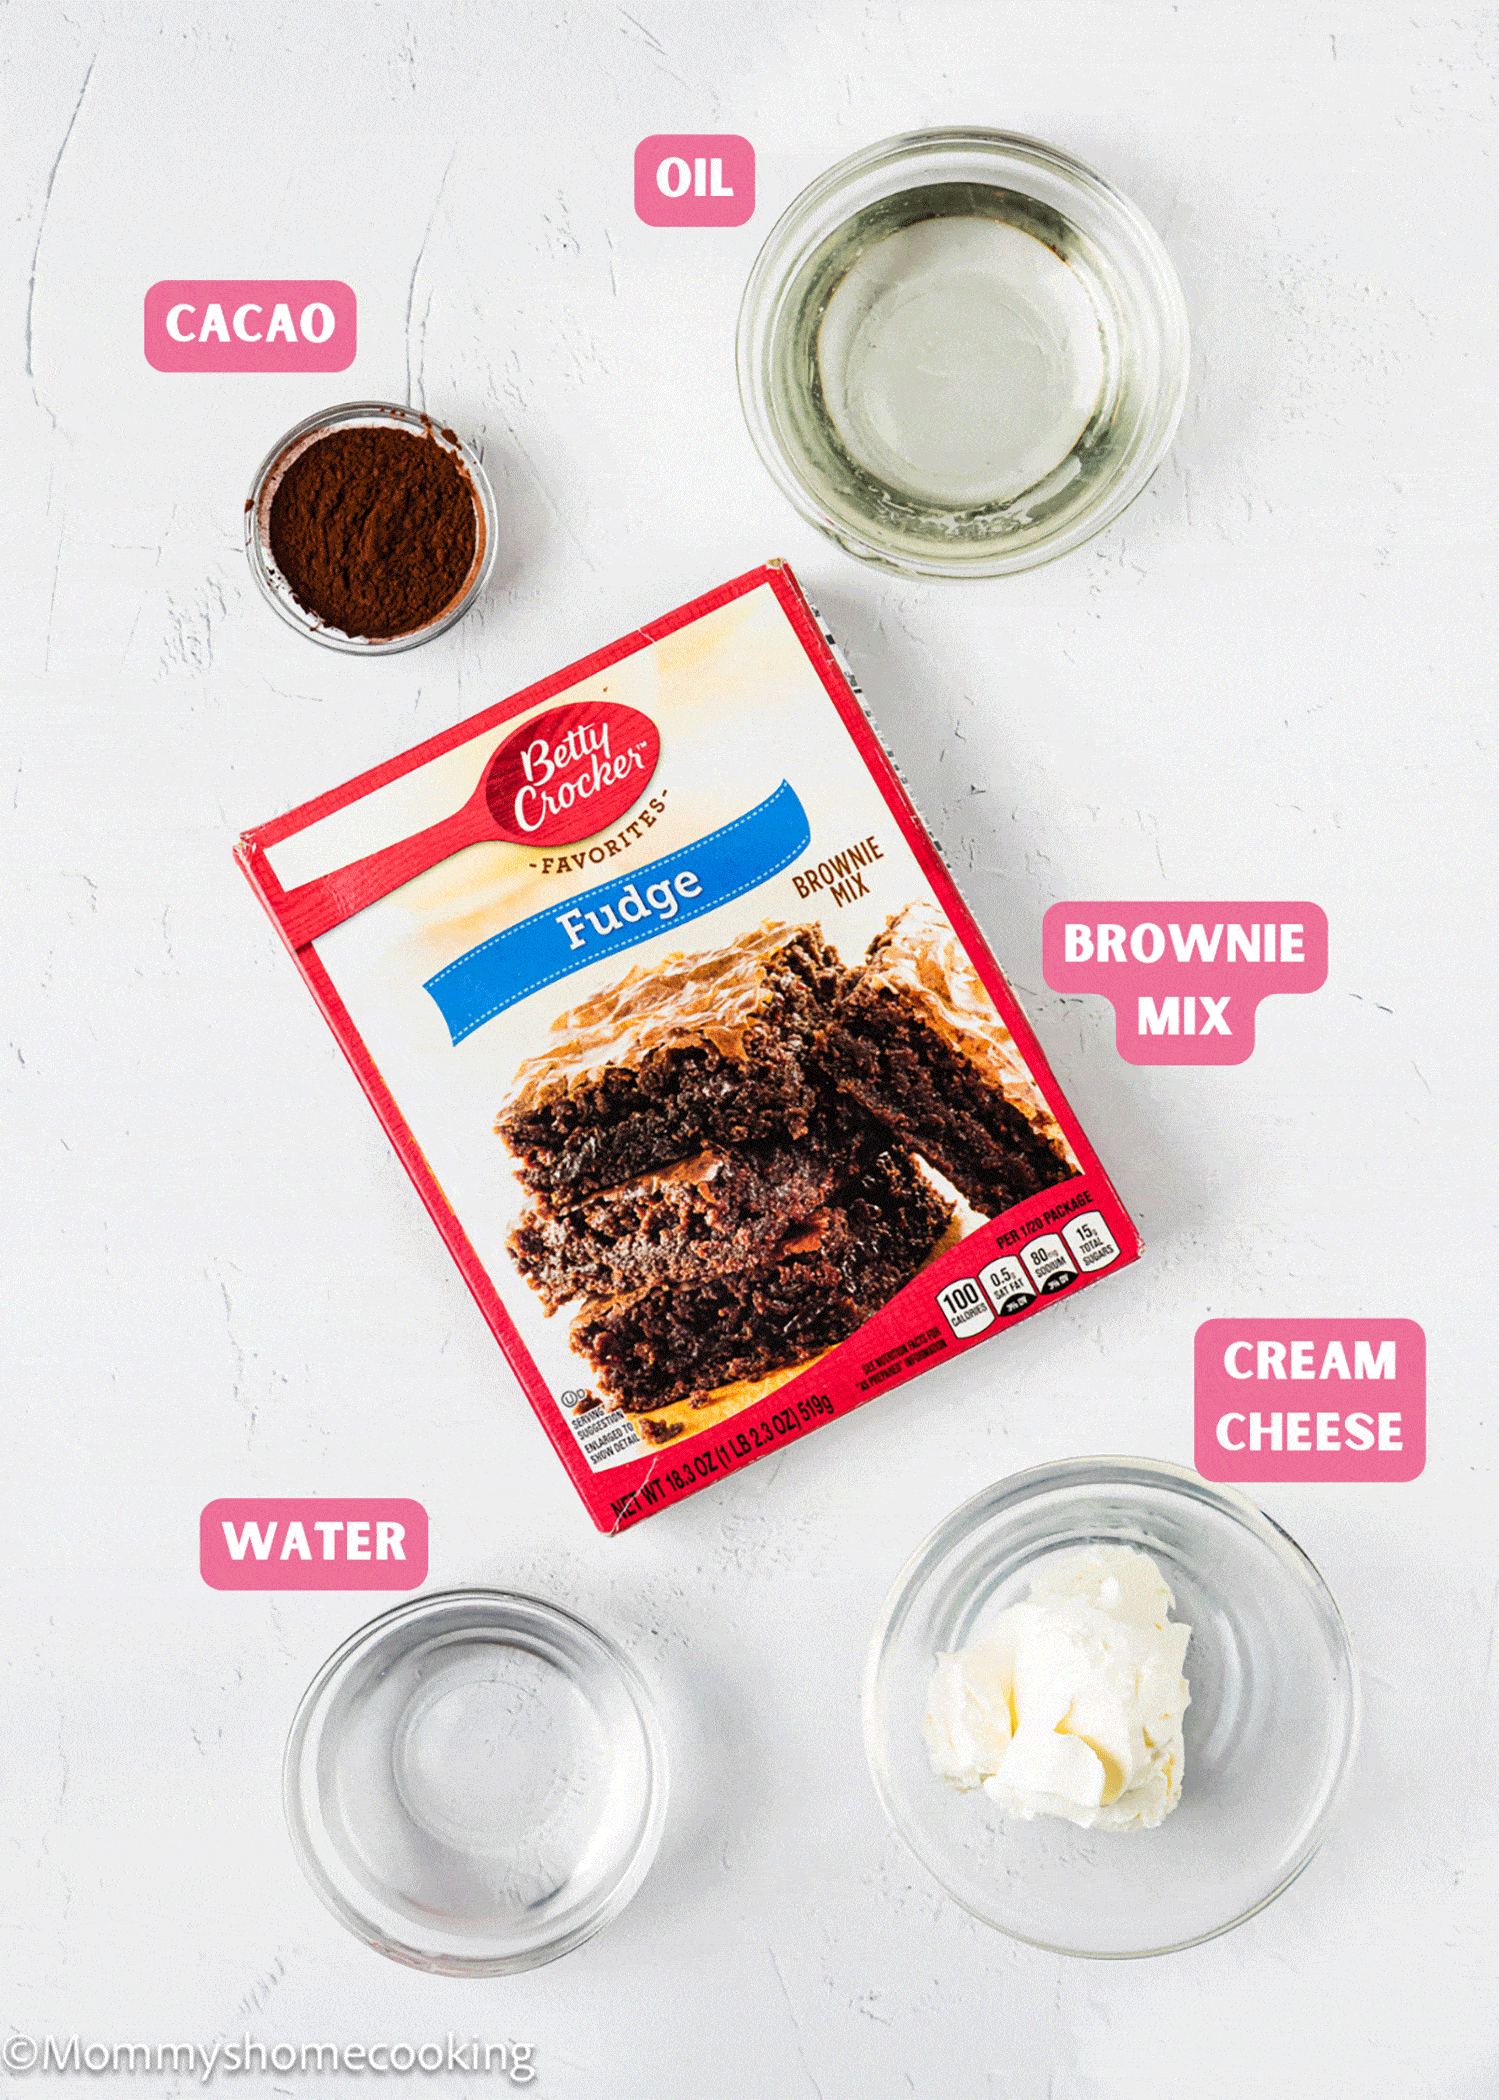 The ingredients for boxed brownies made without eggs are shown on a white surface.